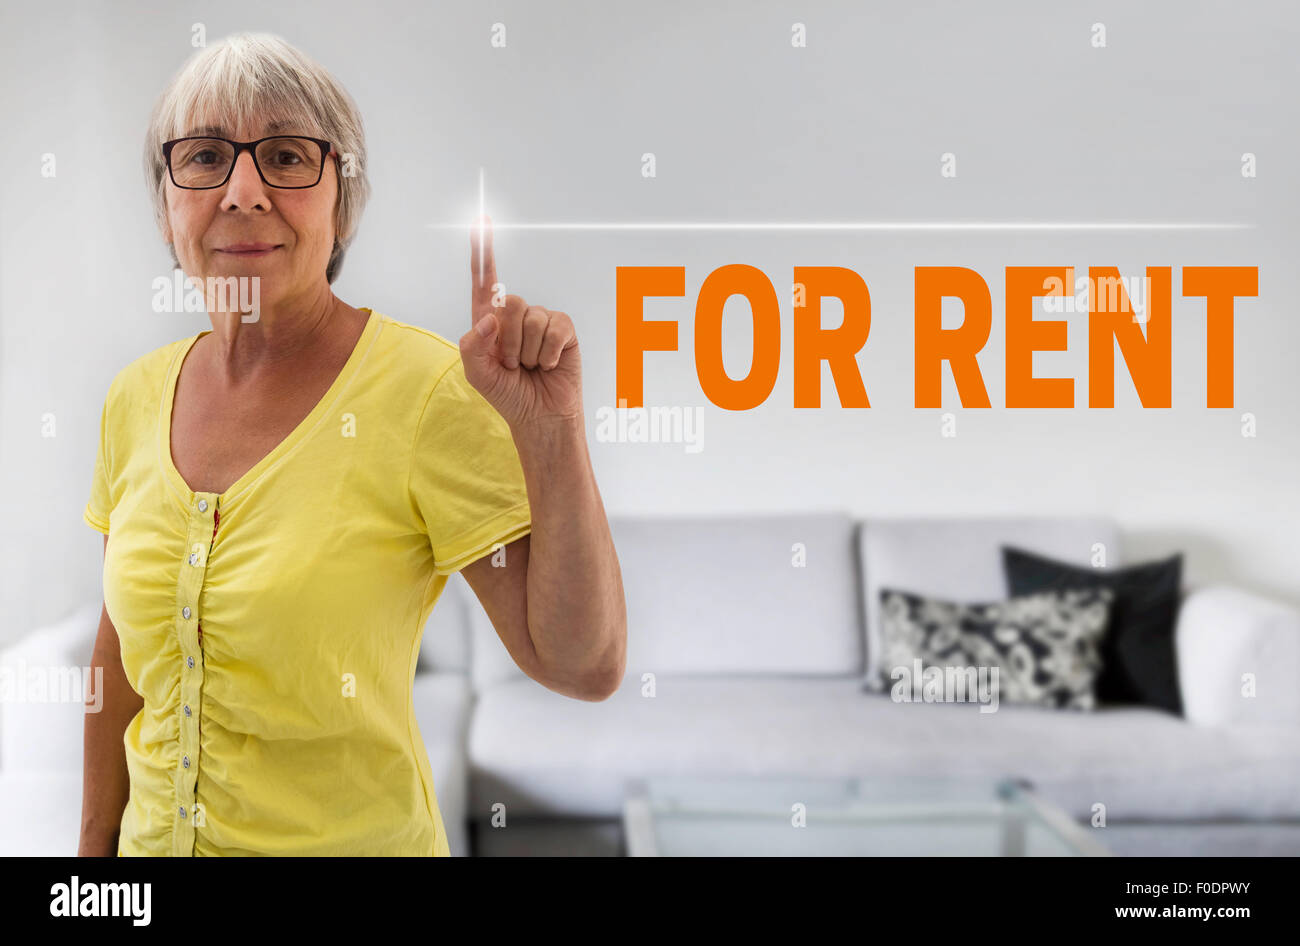 for rent touchscreen is shown by senior. Stock Photo